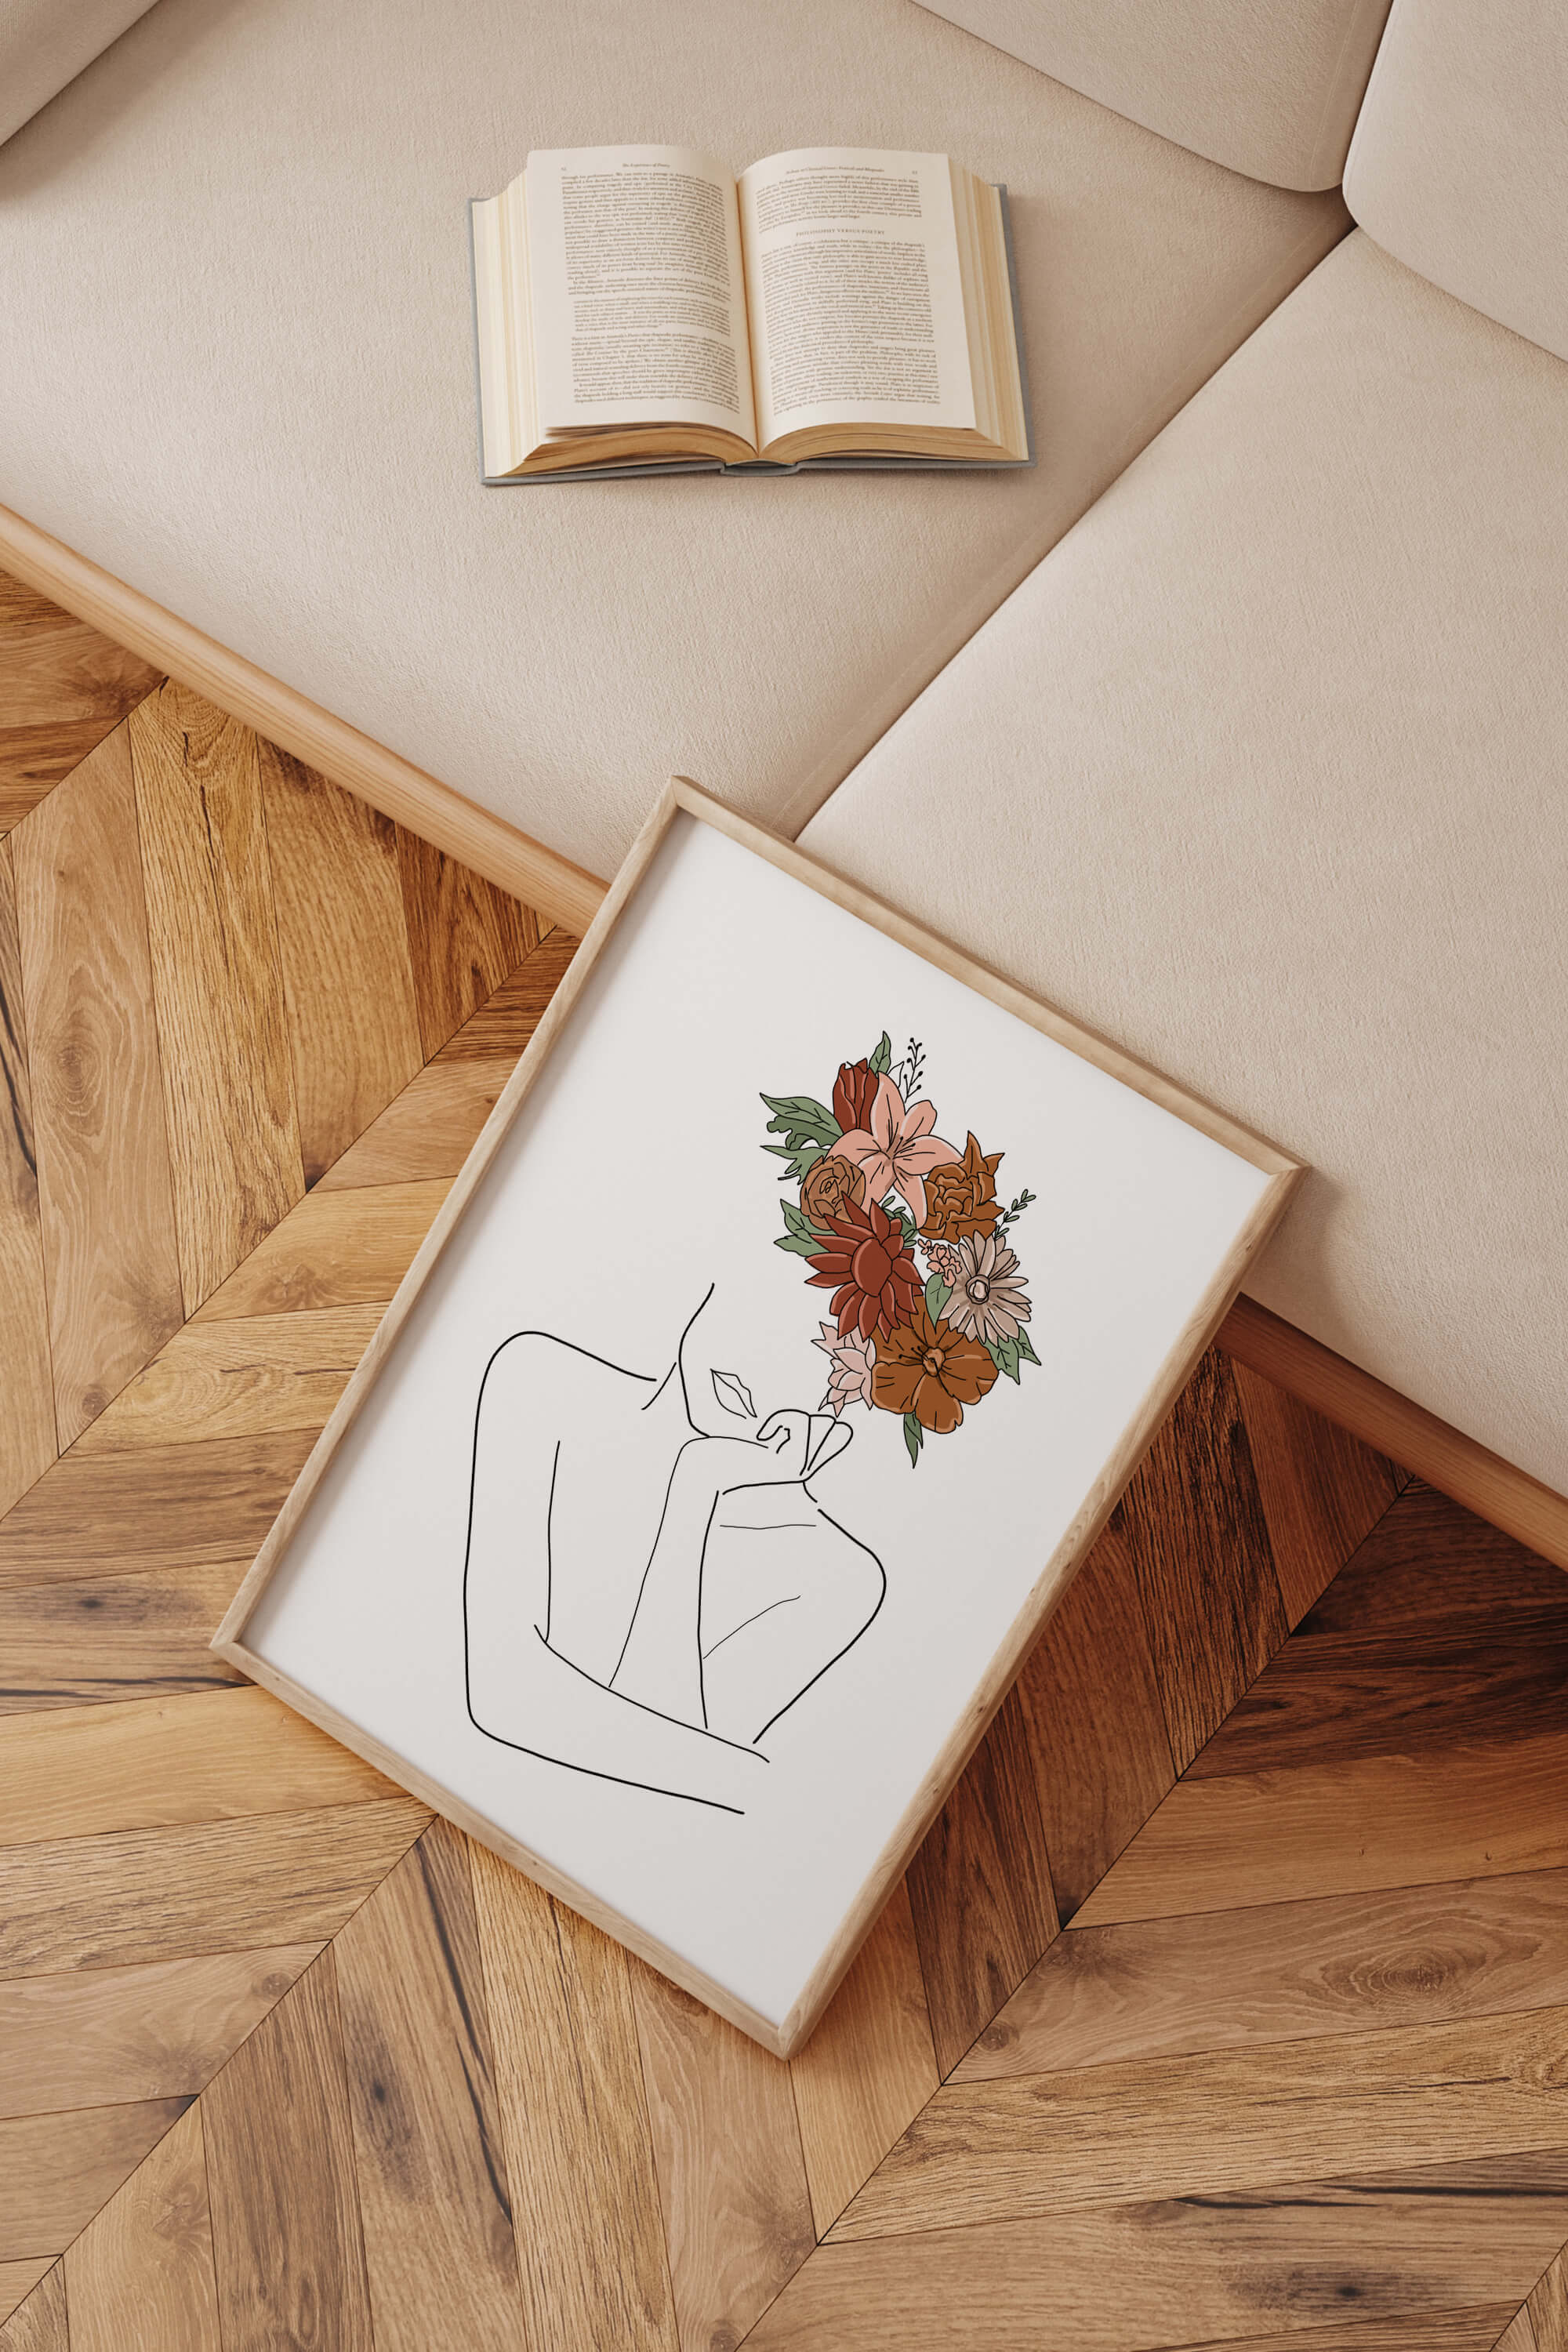 Sophisticated line art of a thinking woman with a blooming flower head, a minimalist depiction of feminine wisdom.